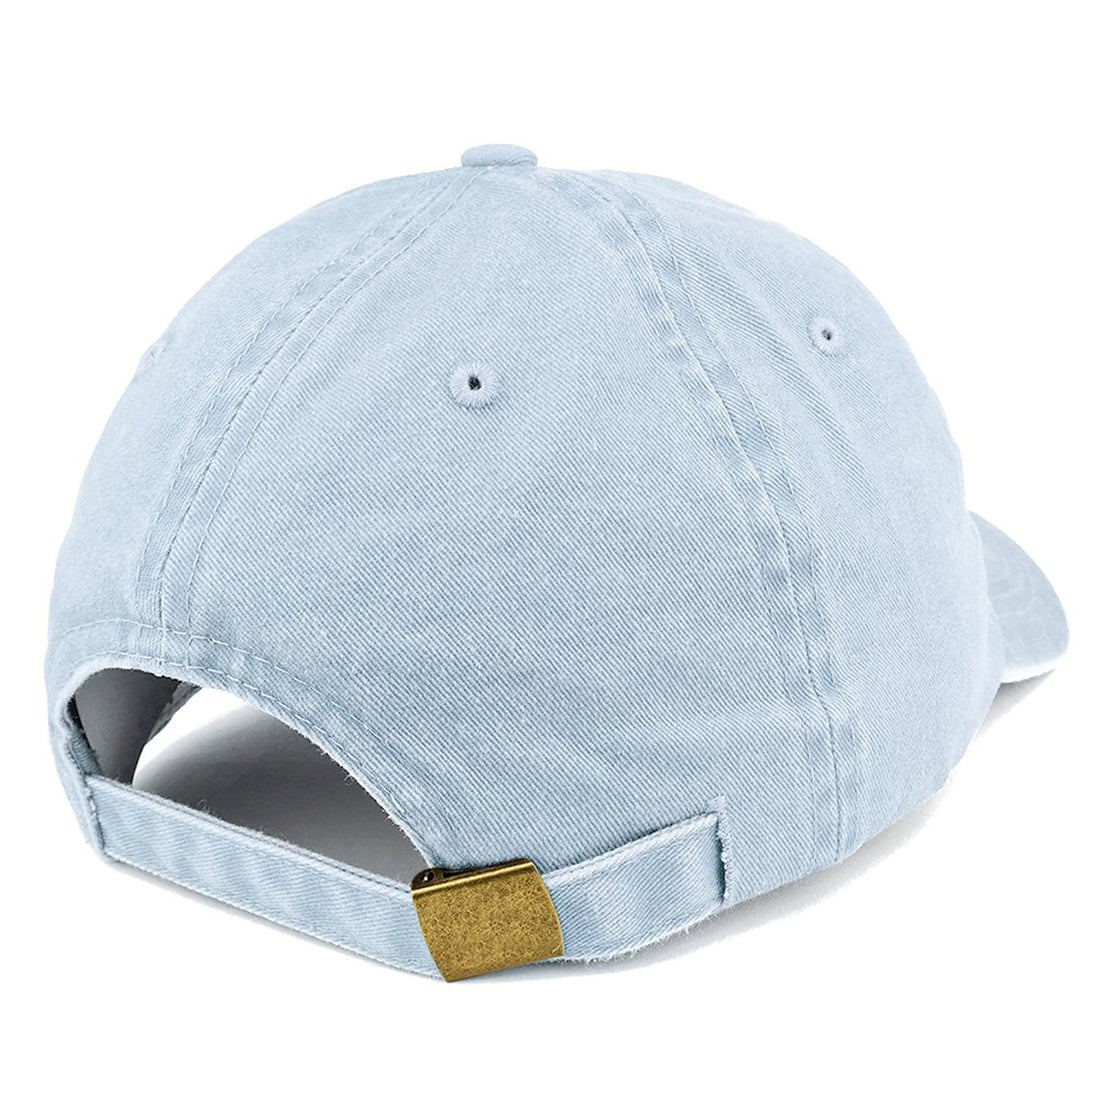 Trendy Apparel Shop Established 1984 Embroidered 35th Birthday Gift Pigment Dyed Washed Cotton Cap